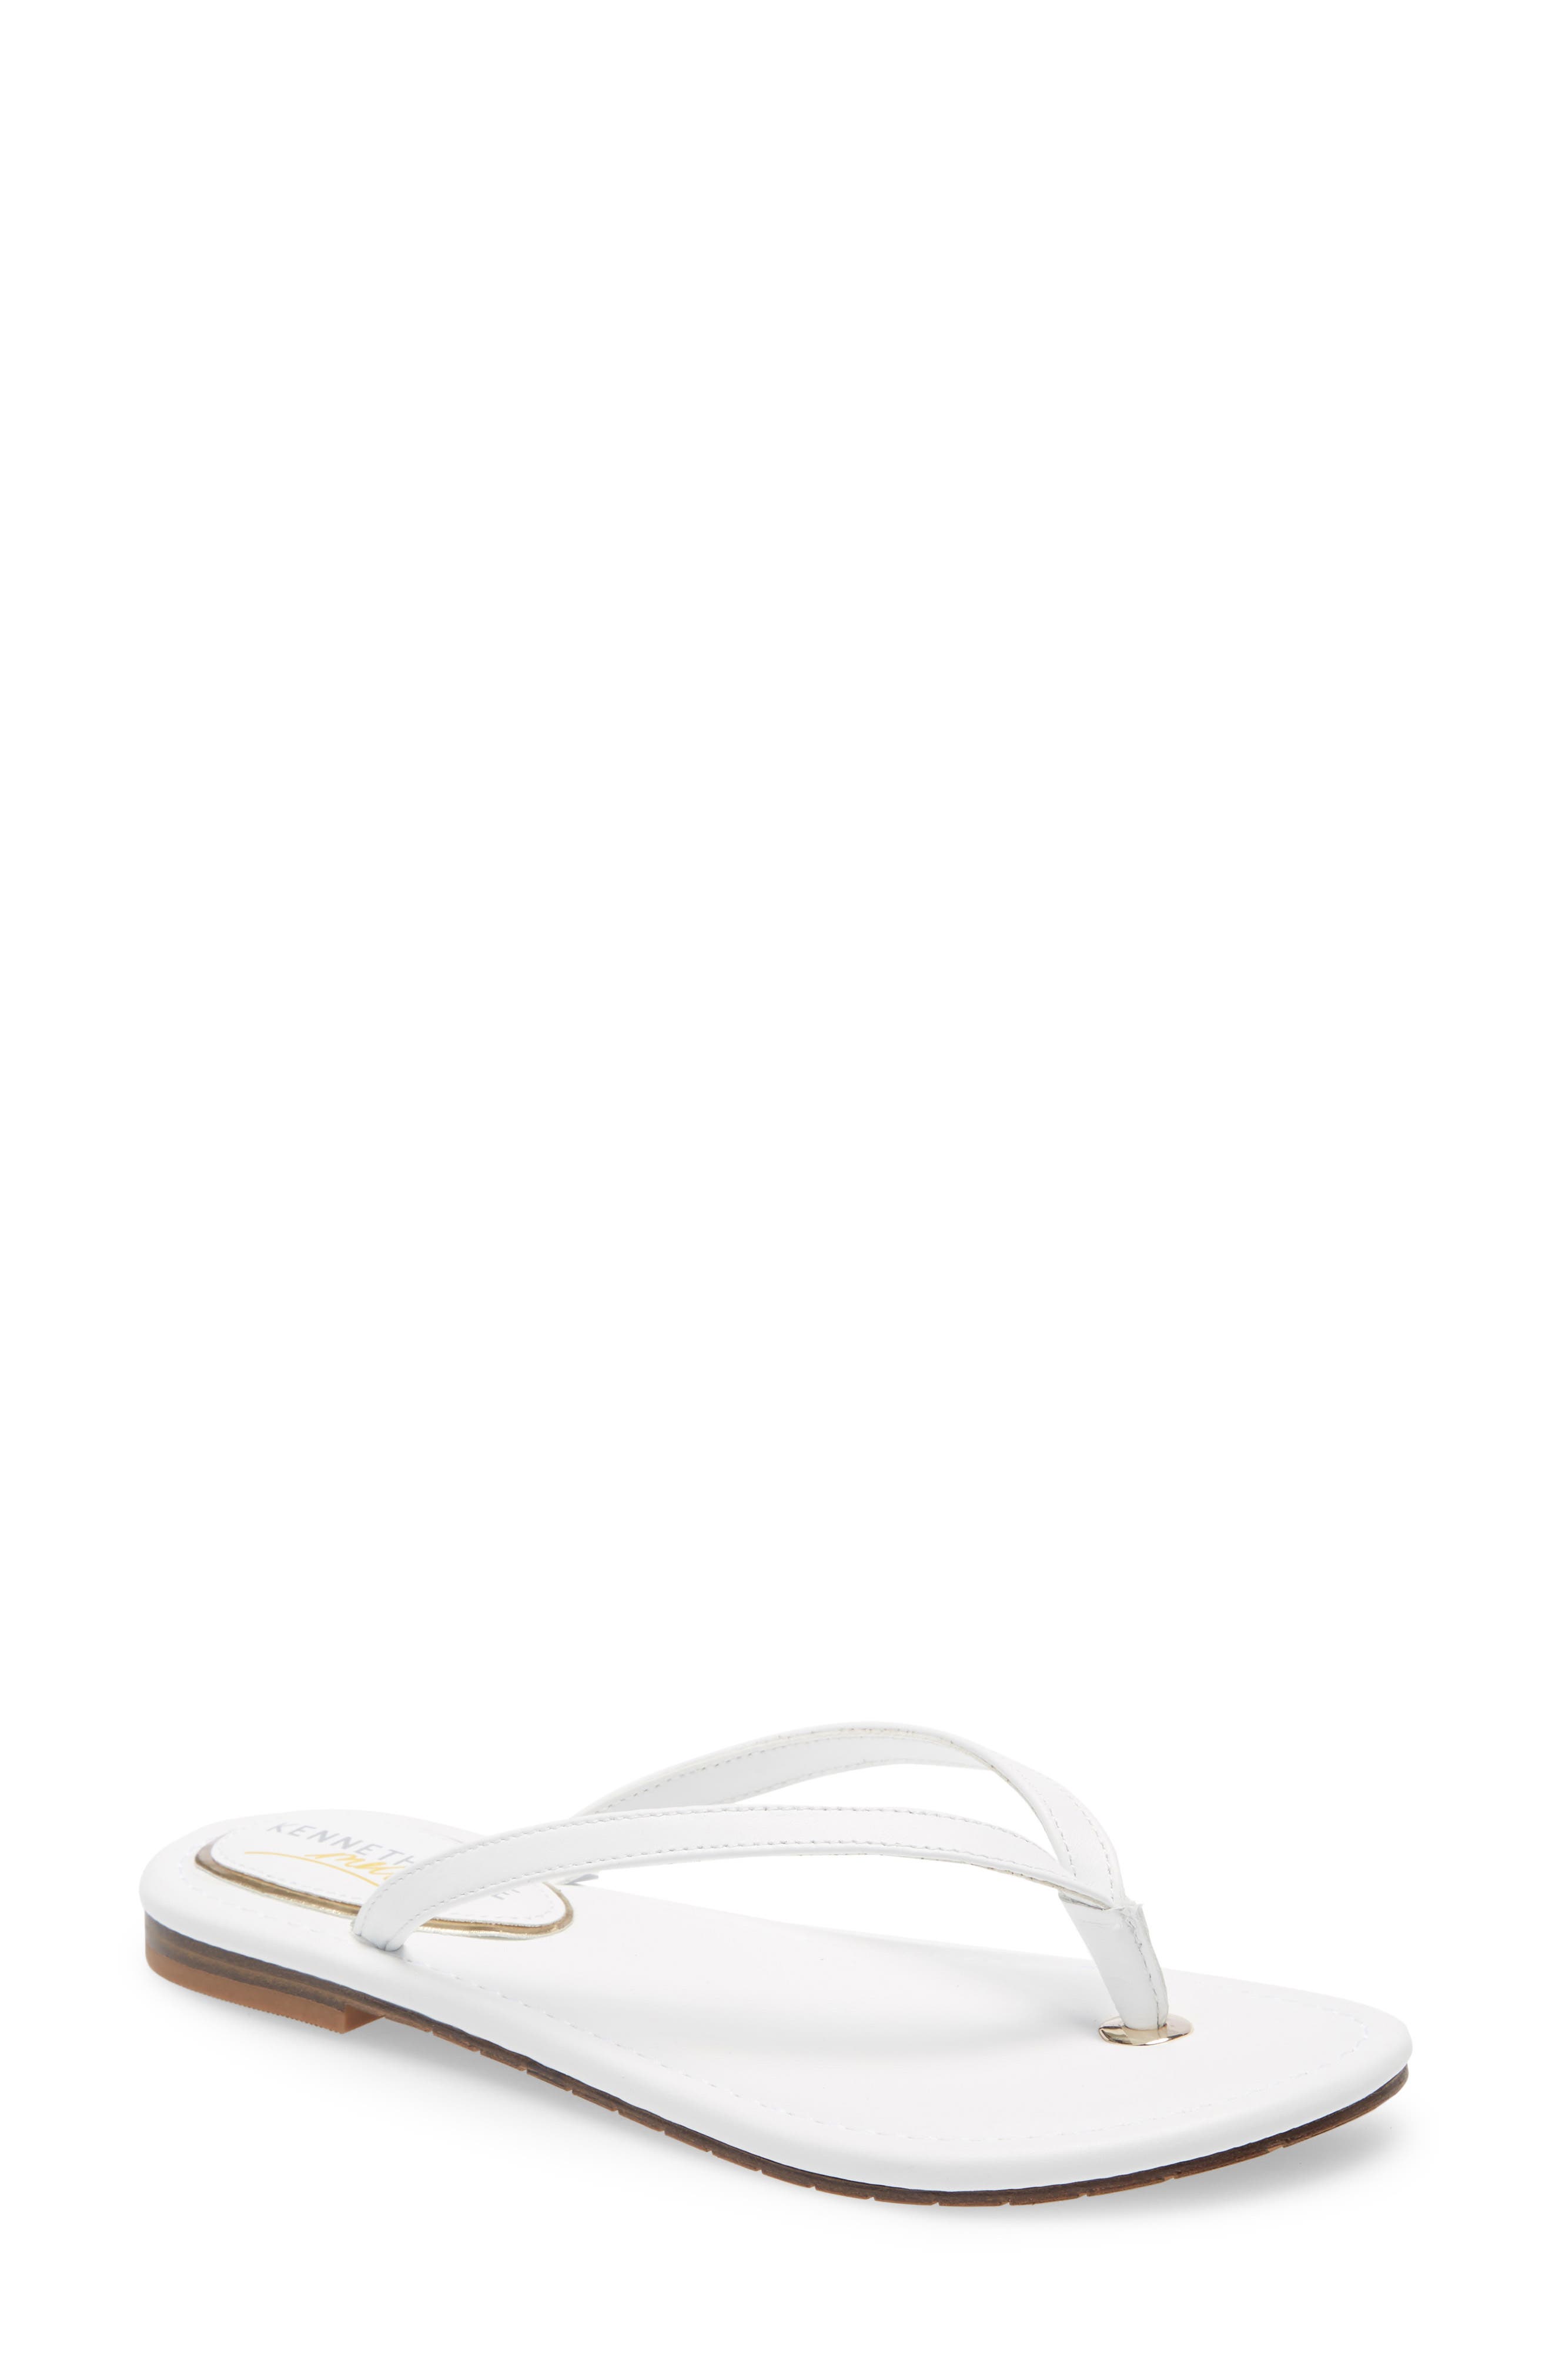 kenneth cole white sandals